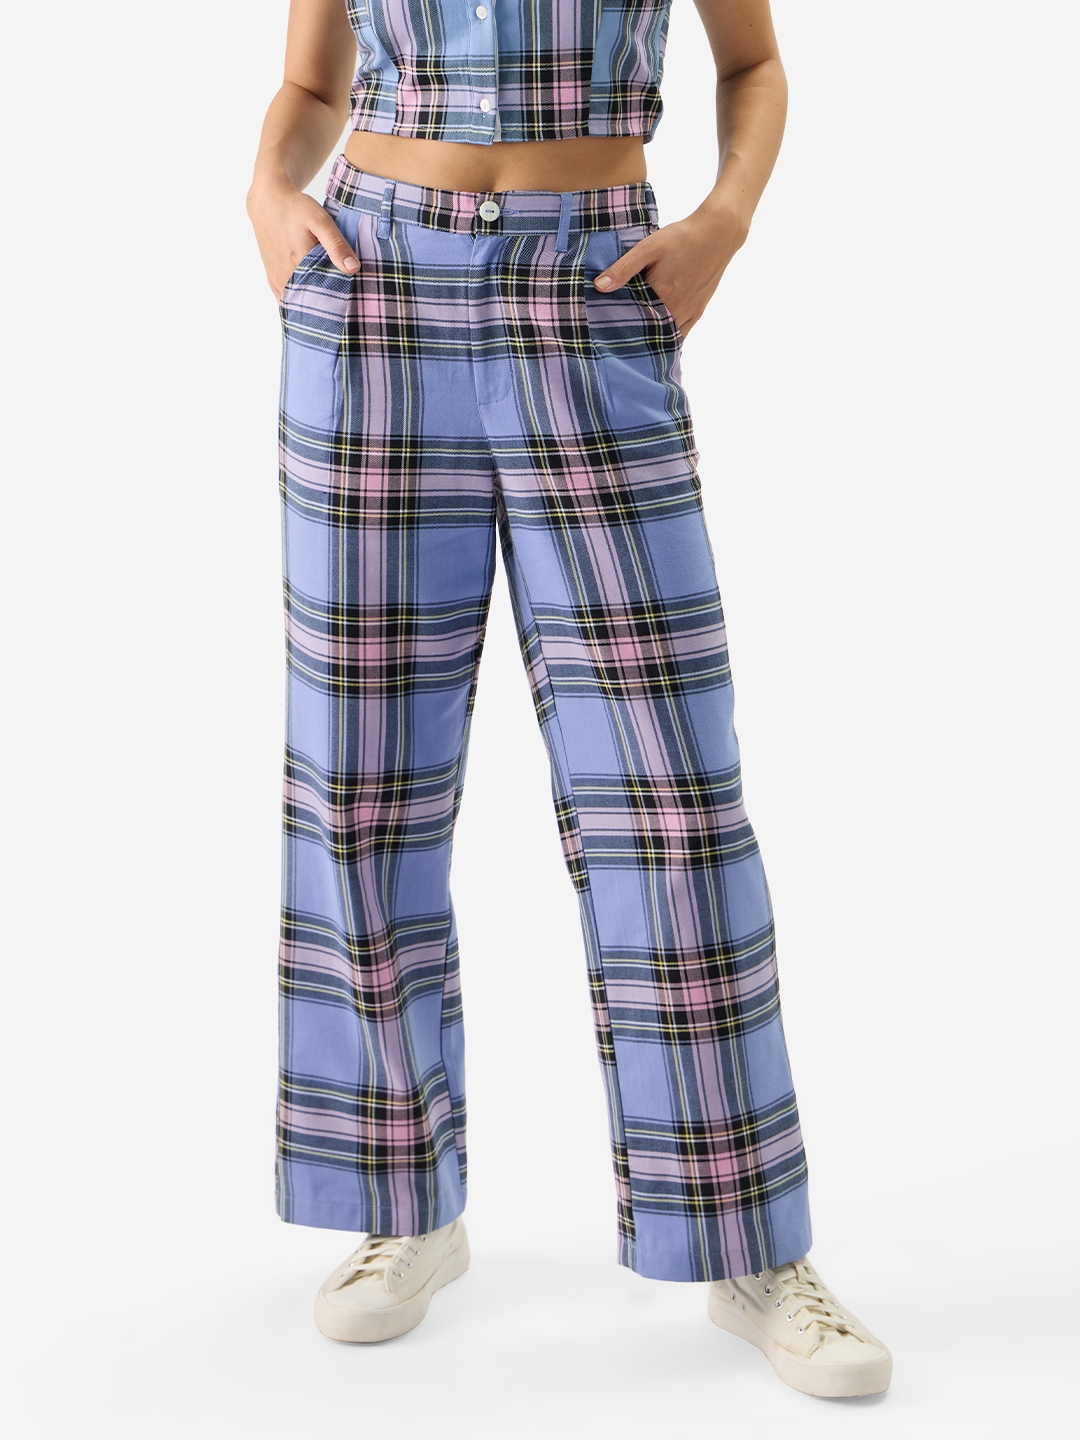 The Souled Store | Women's Lilac Blossom Pants